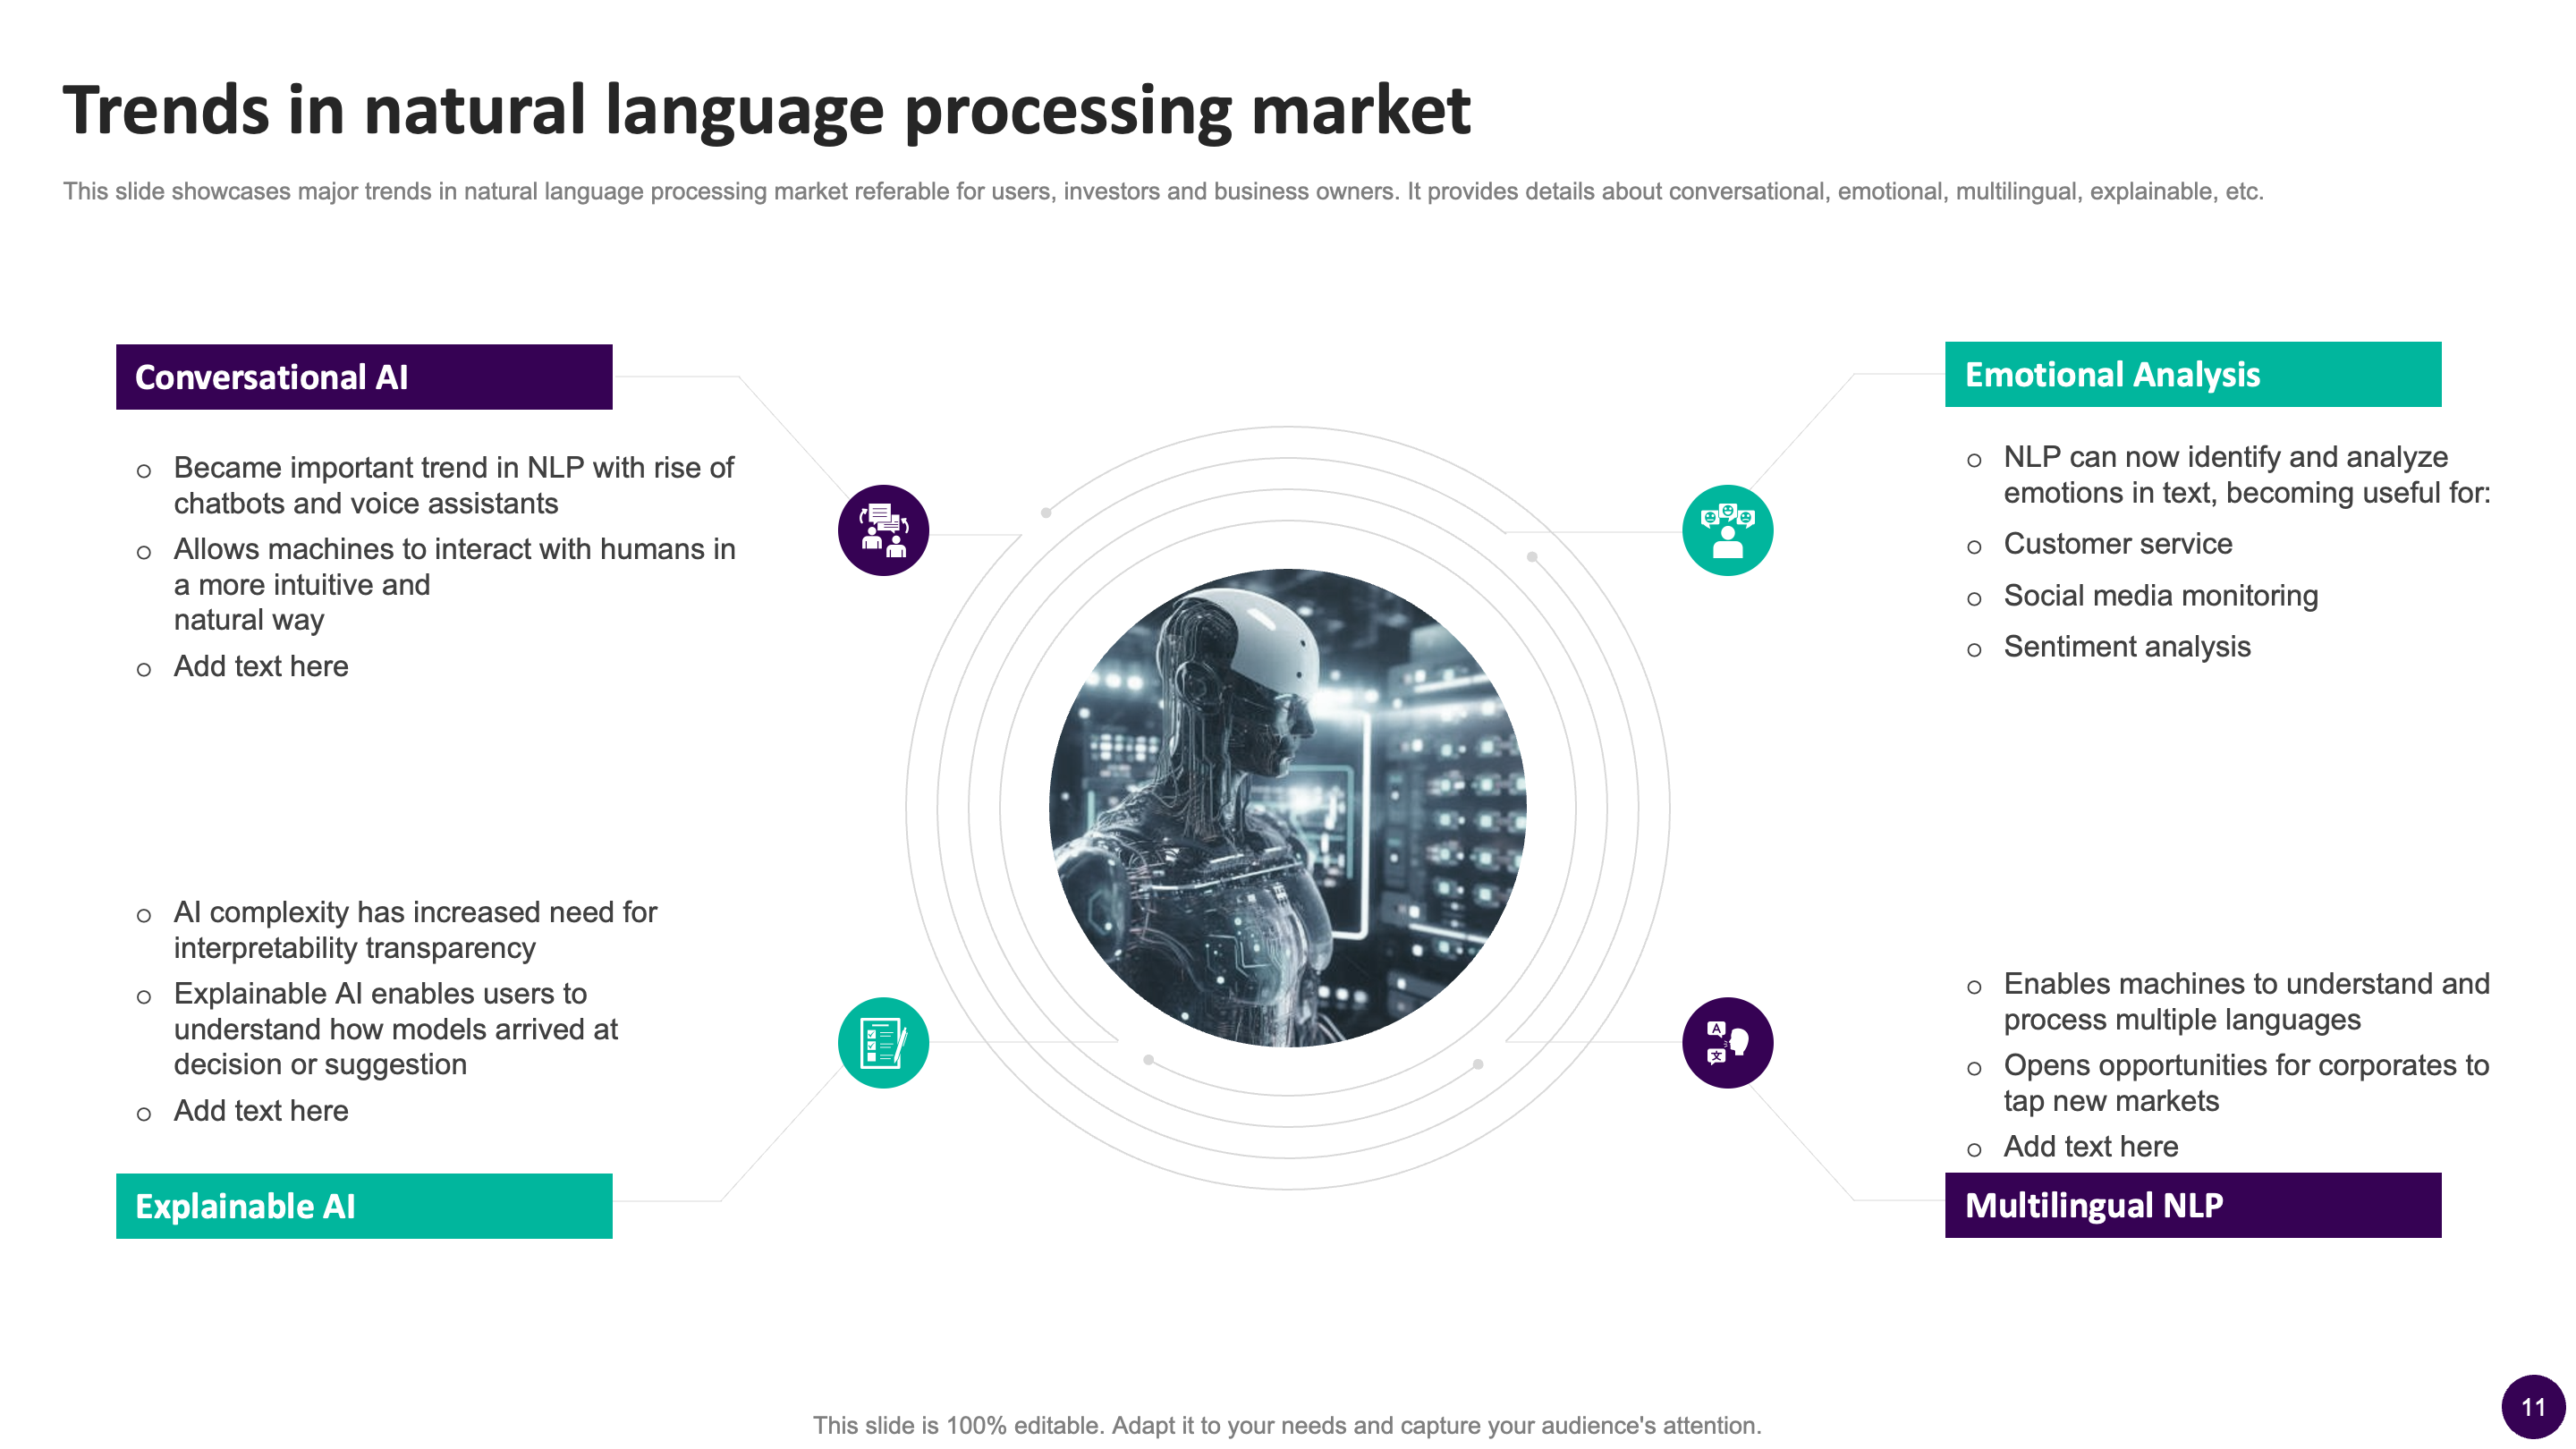 Trends in Natural Language Processing Market